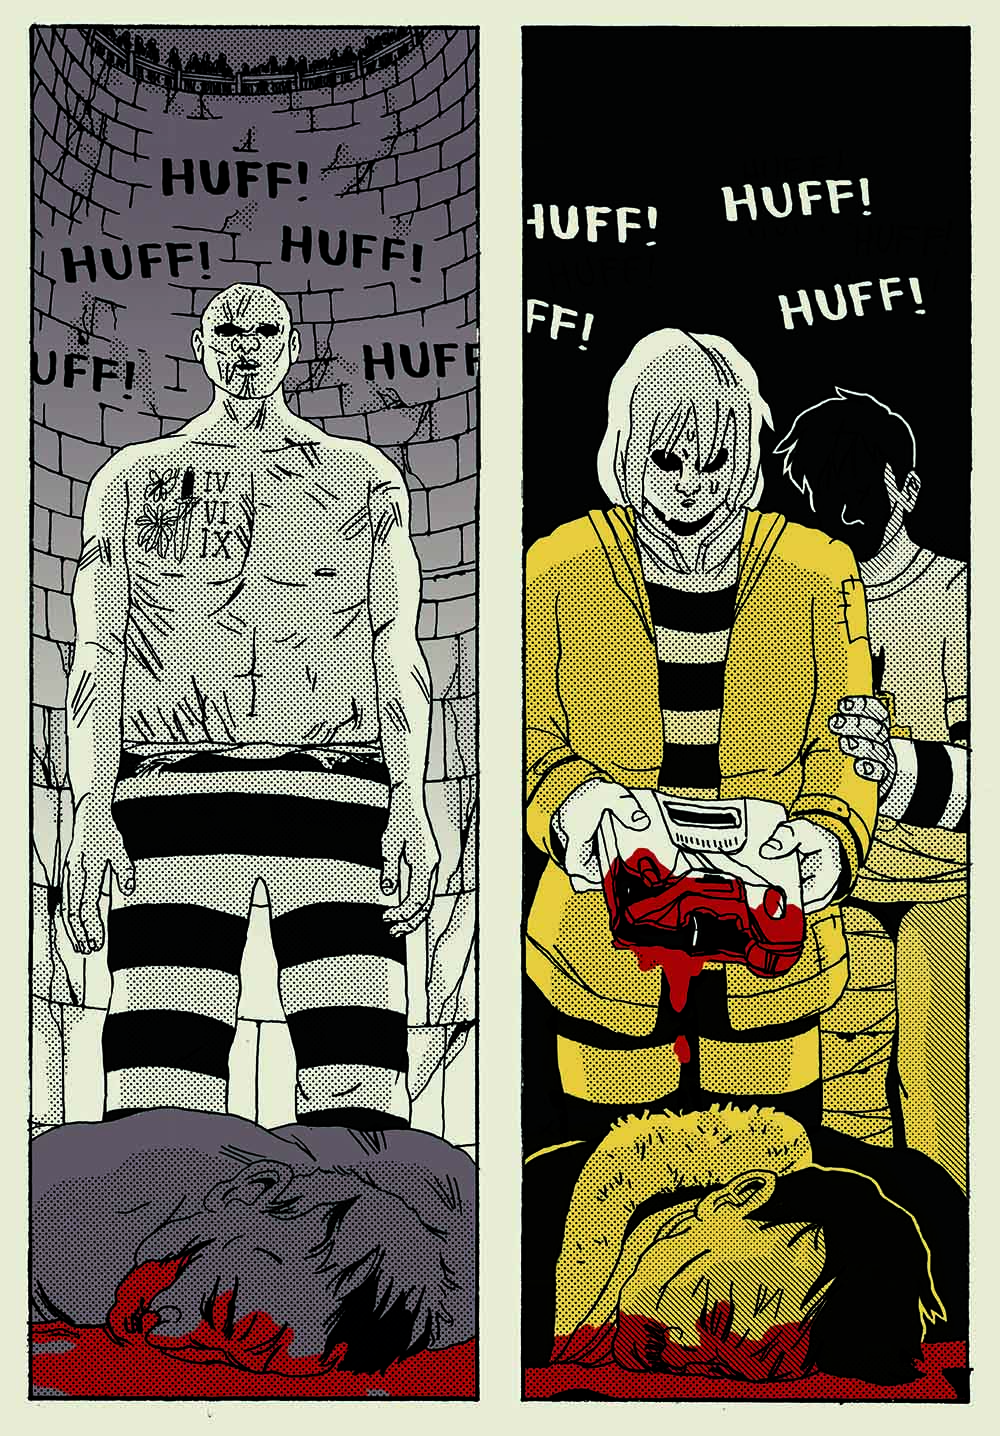 A black, white, yellow and brown illustration shows two side by side scenes of person/s standing over a bloodied dead body.